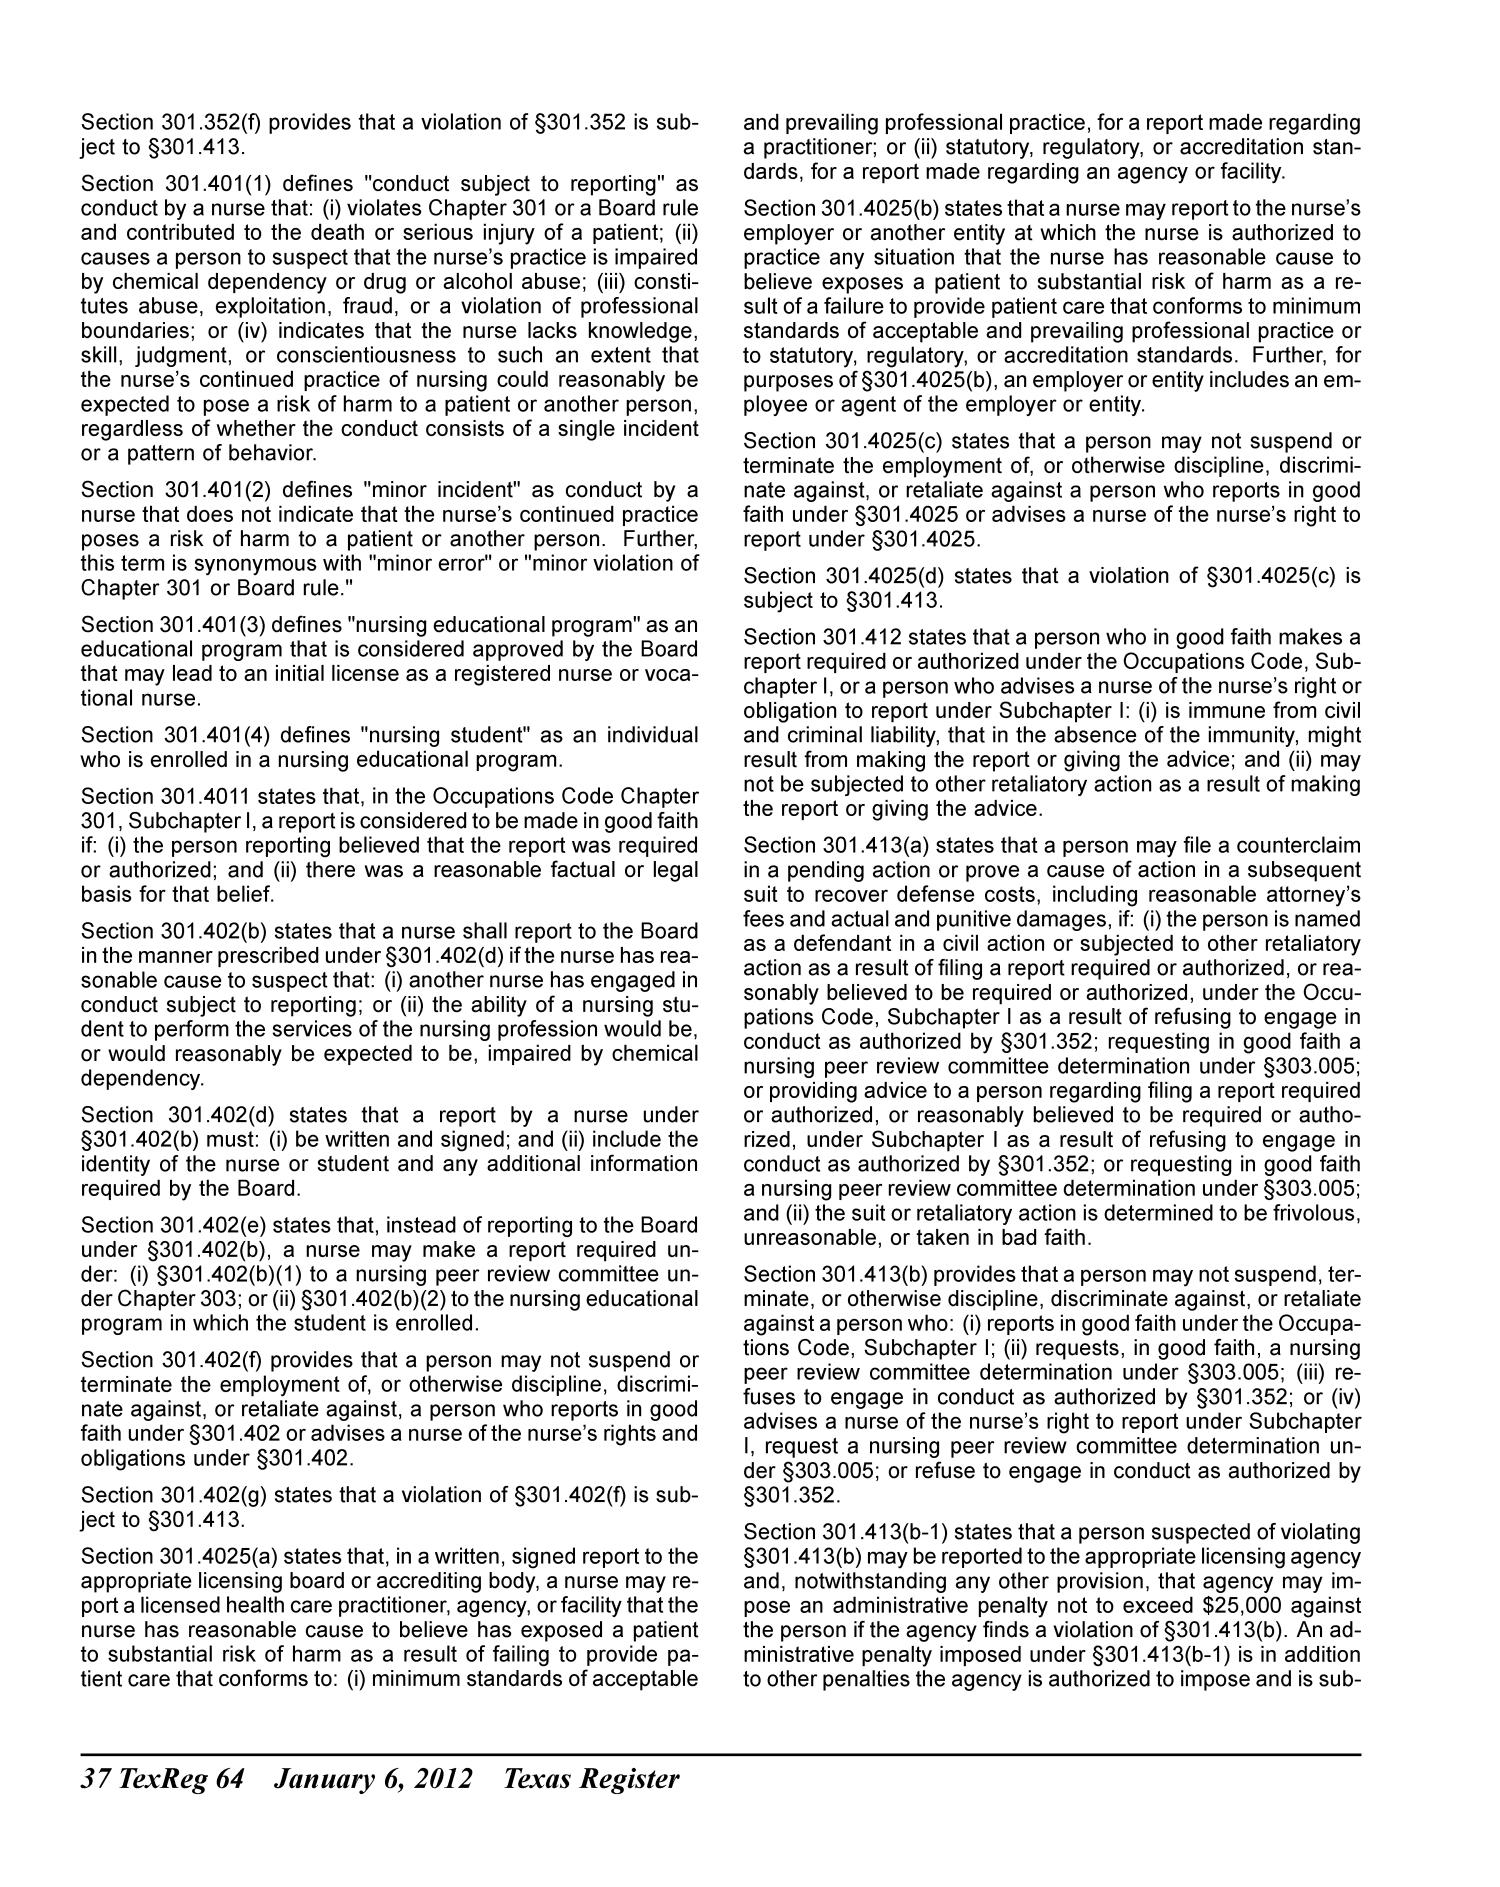 Texas Register, Volume 37, Number 1, Pages 1-84, January 6, 2012
                                                
                                                    64
                                                